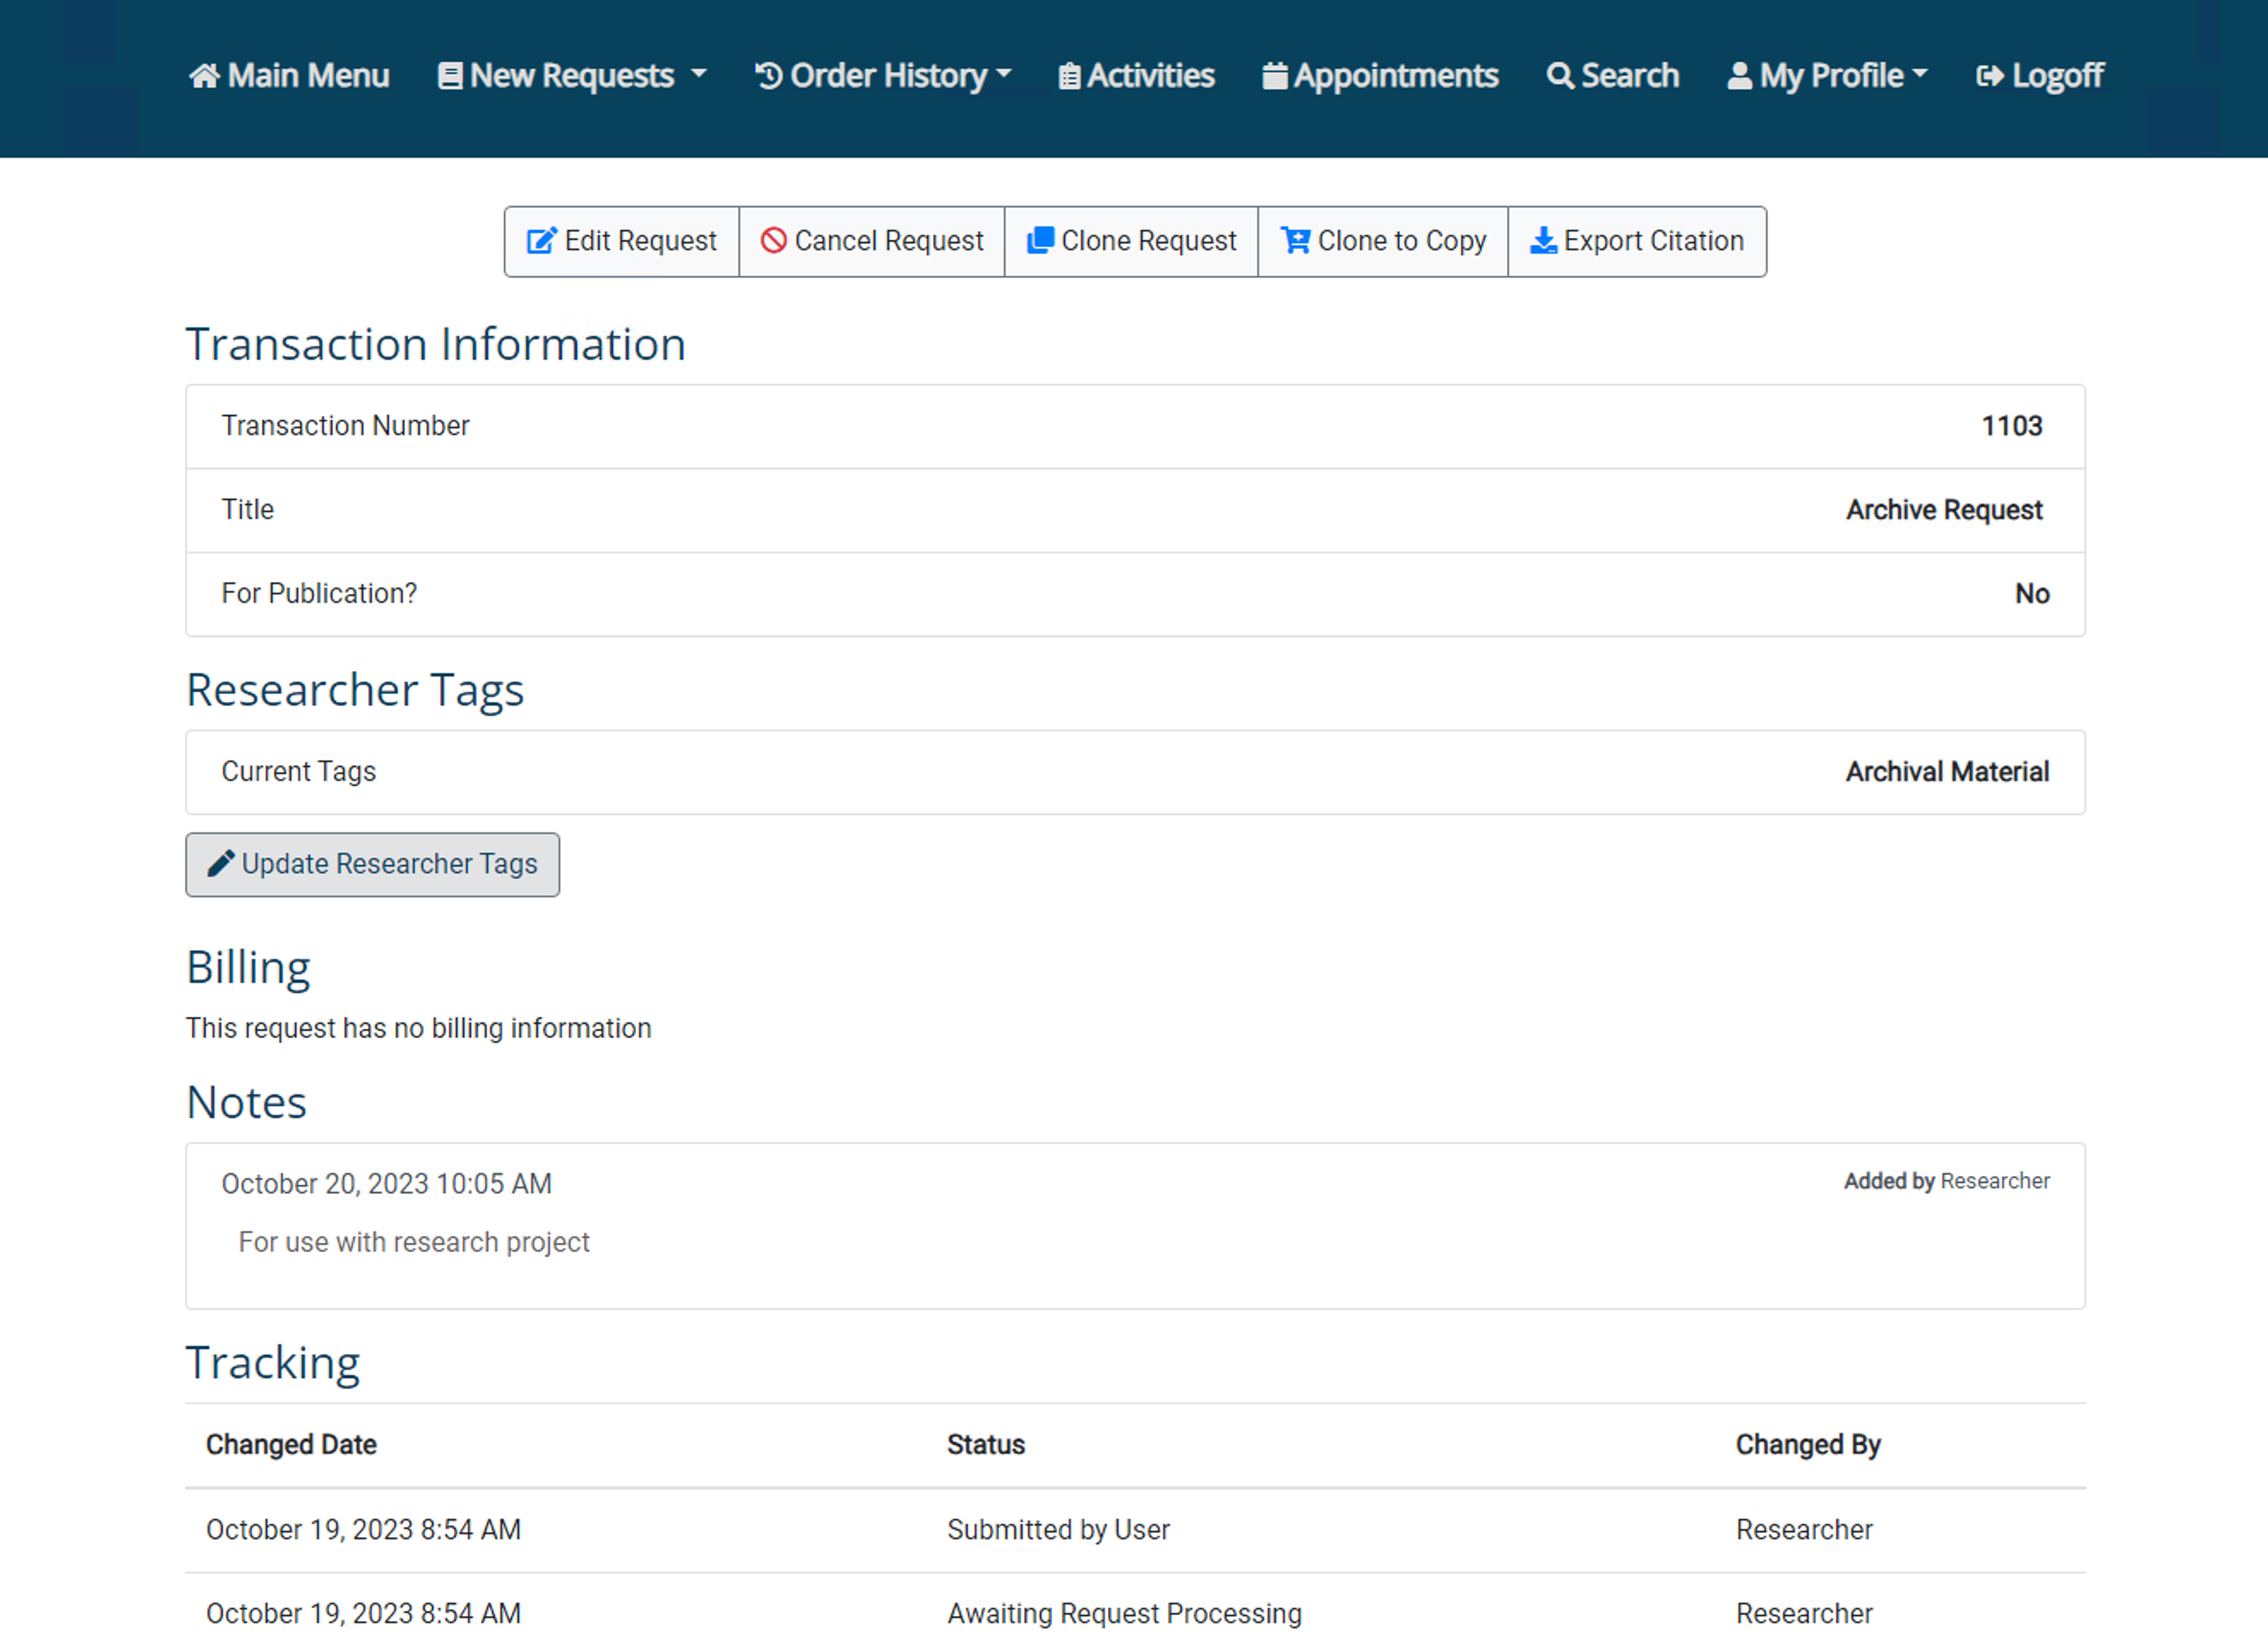 Transaction Information page